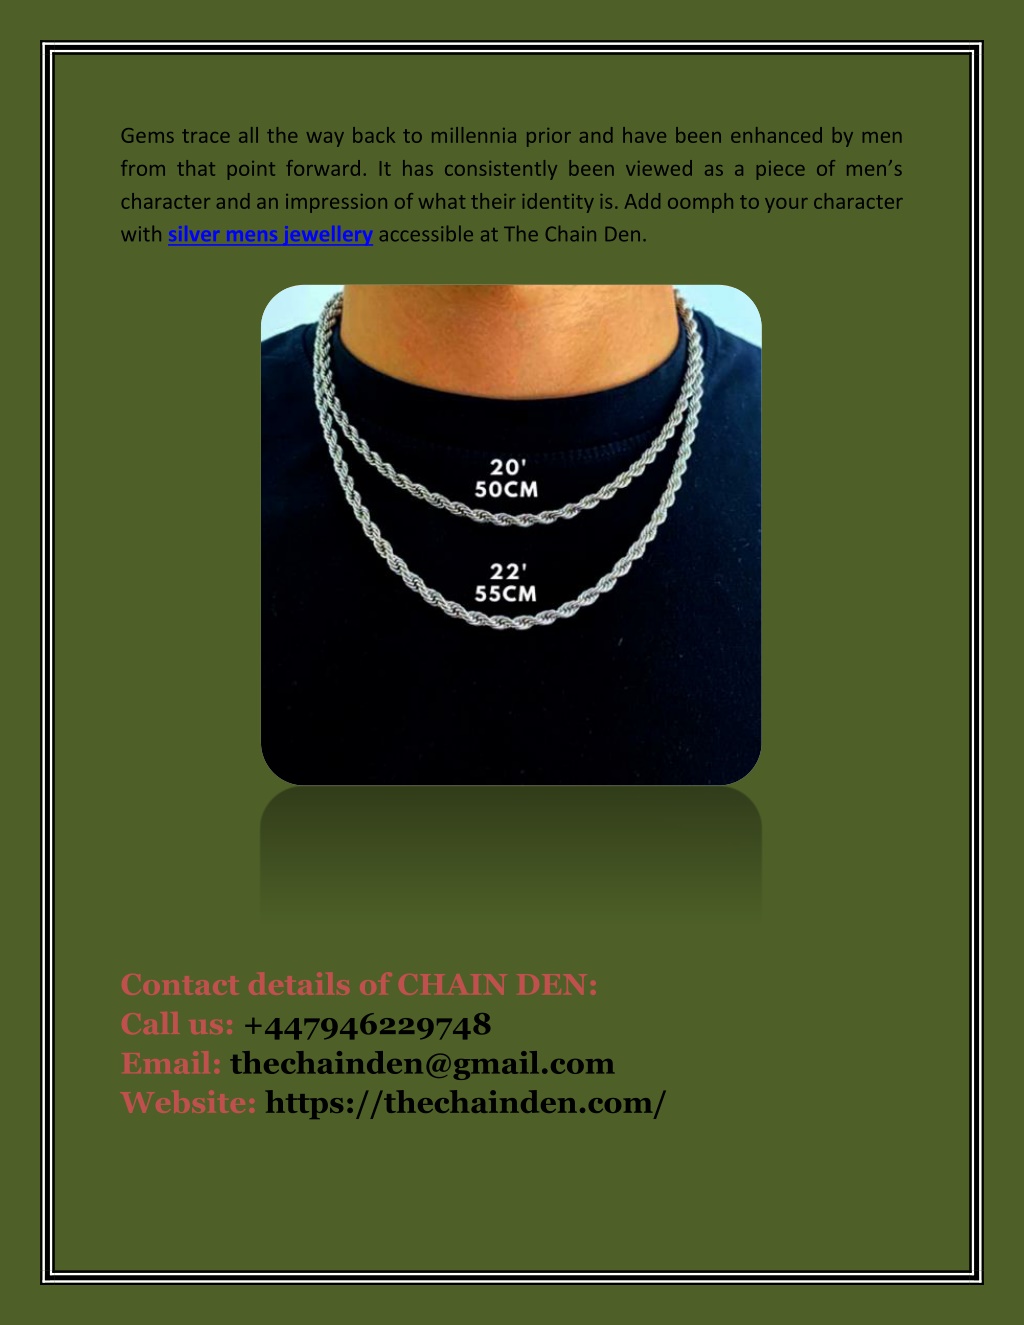 PPT - Find the Silver Men’s Jewellery Online PowerPoint Presentation ...